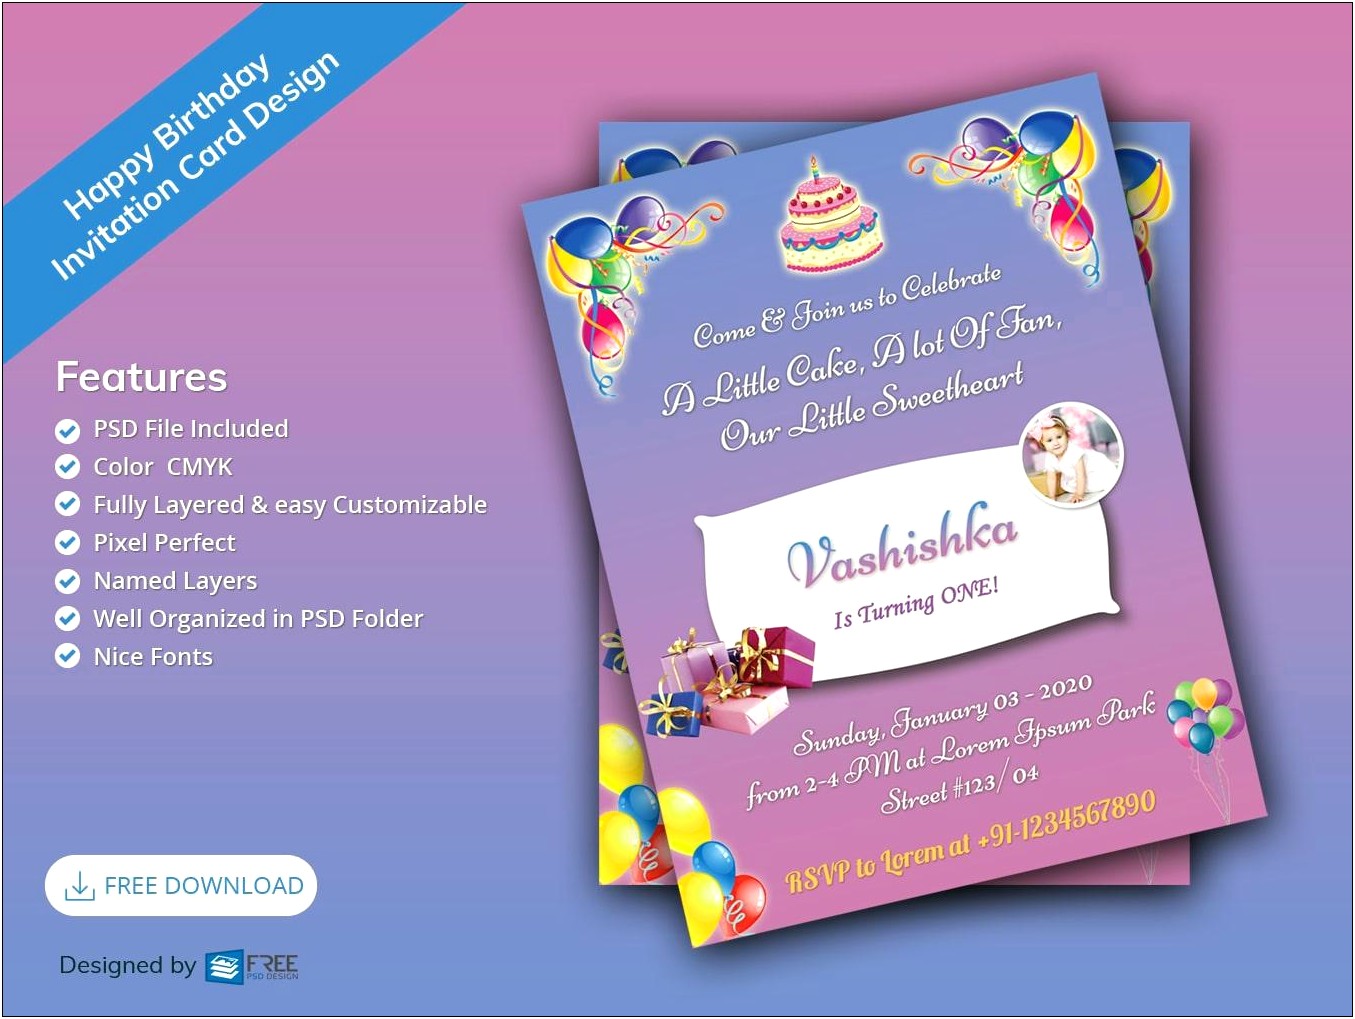 Invitation Template Psd Files Free Download